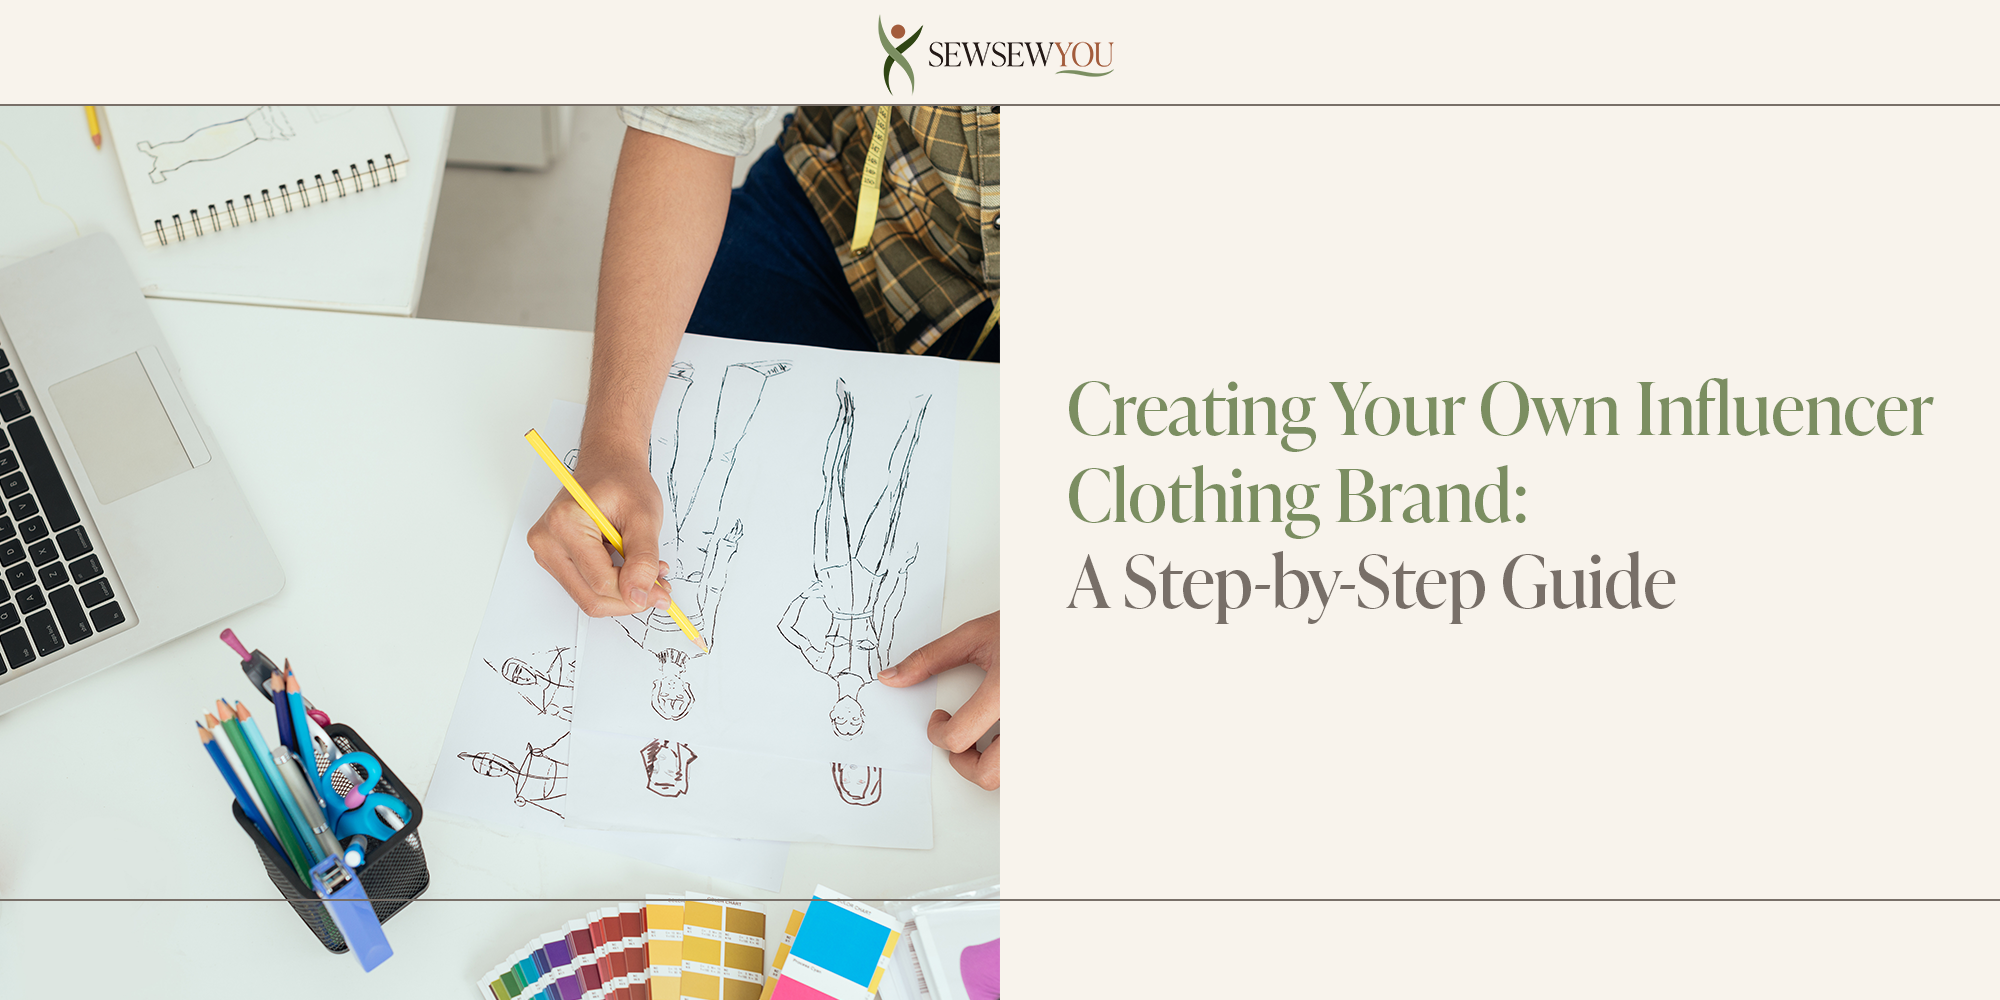 Creating Your Own Influencer Clothing Brand with Sew Sew You: A Step-by-Step Guide